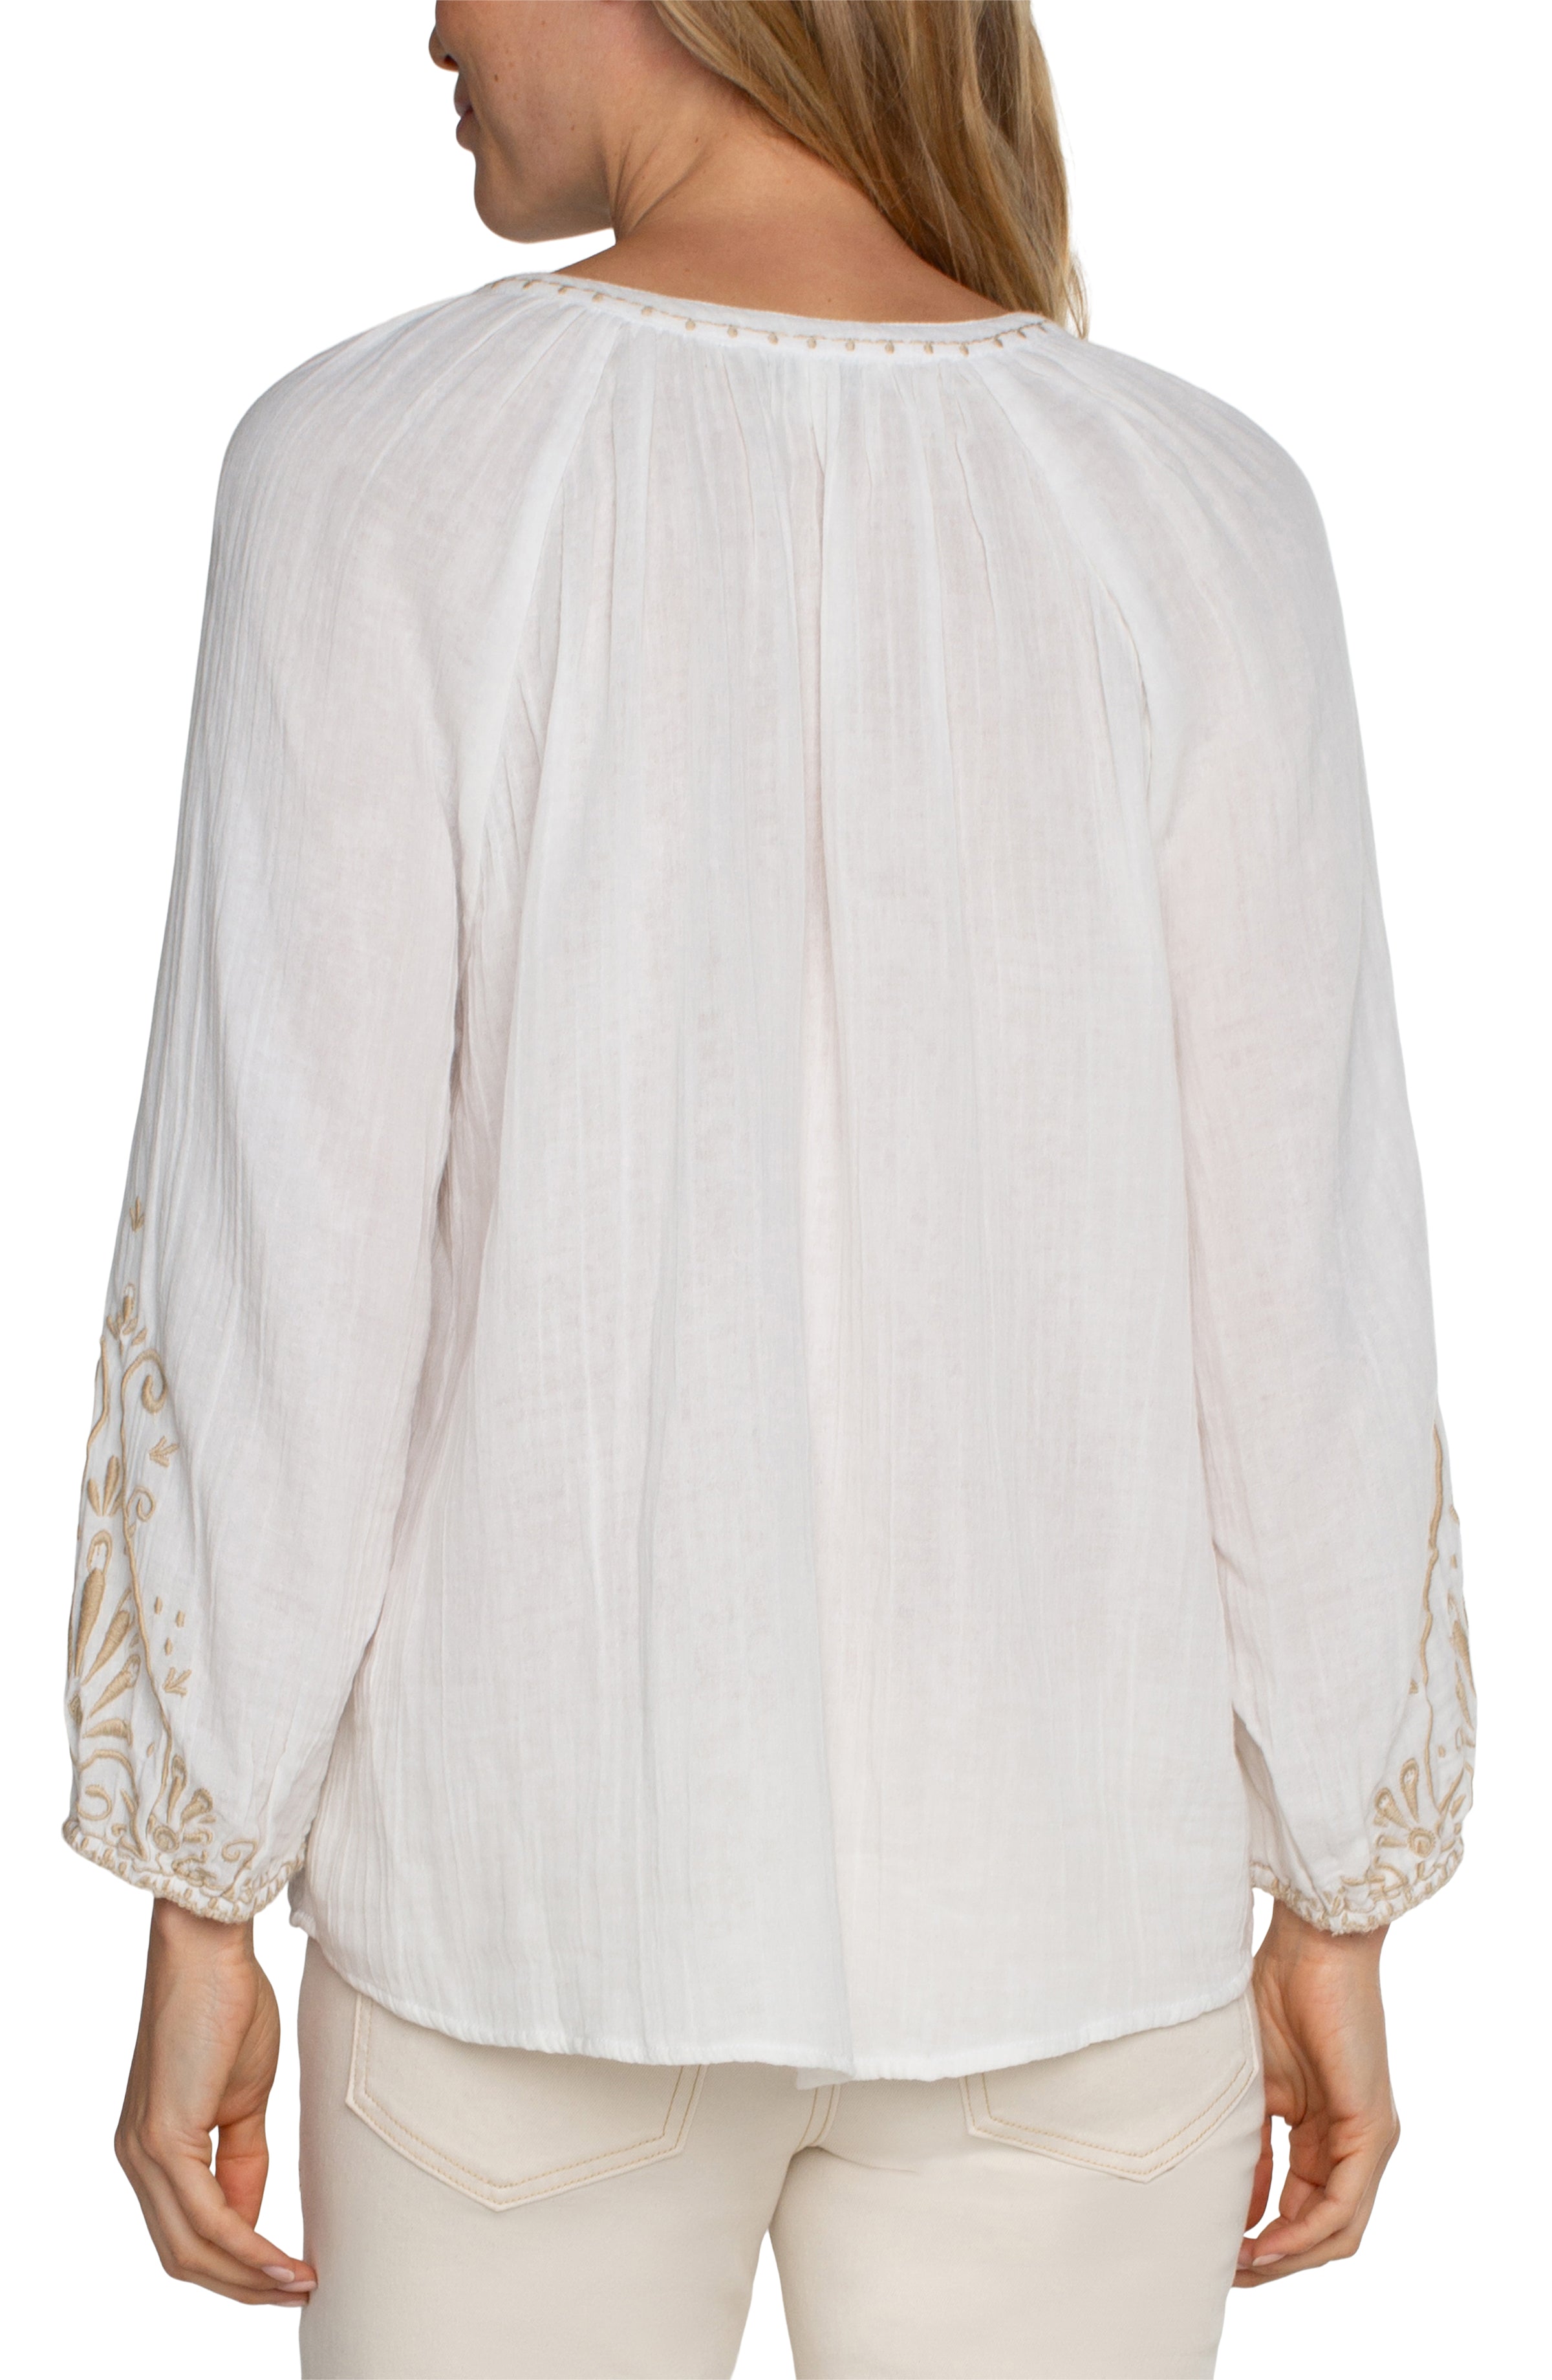 LVP Long Sleeve Embroidered Woven Top - Off White with Tan Back View